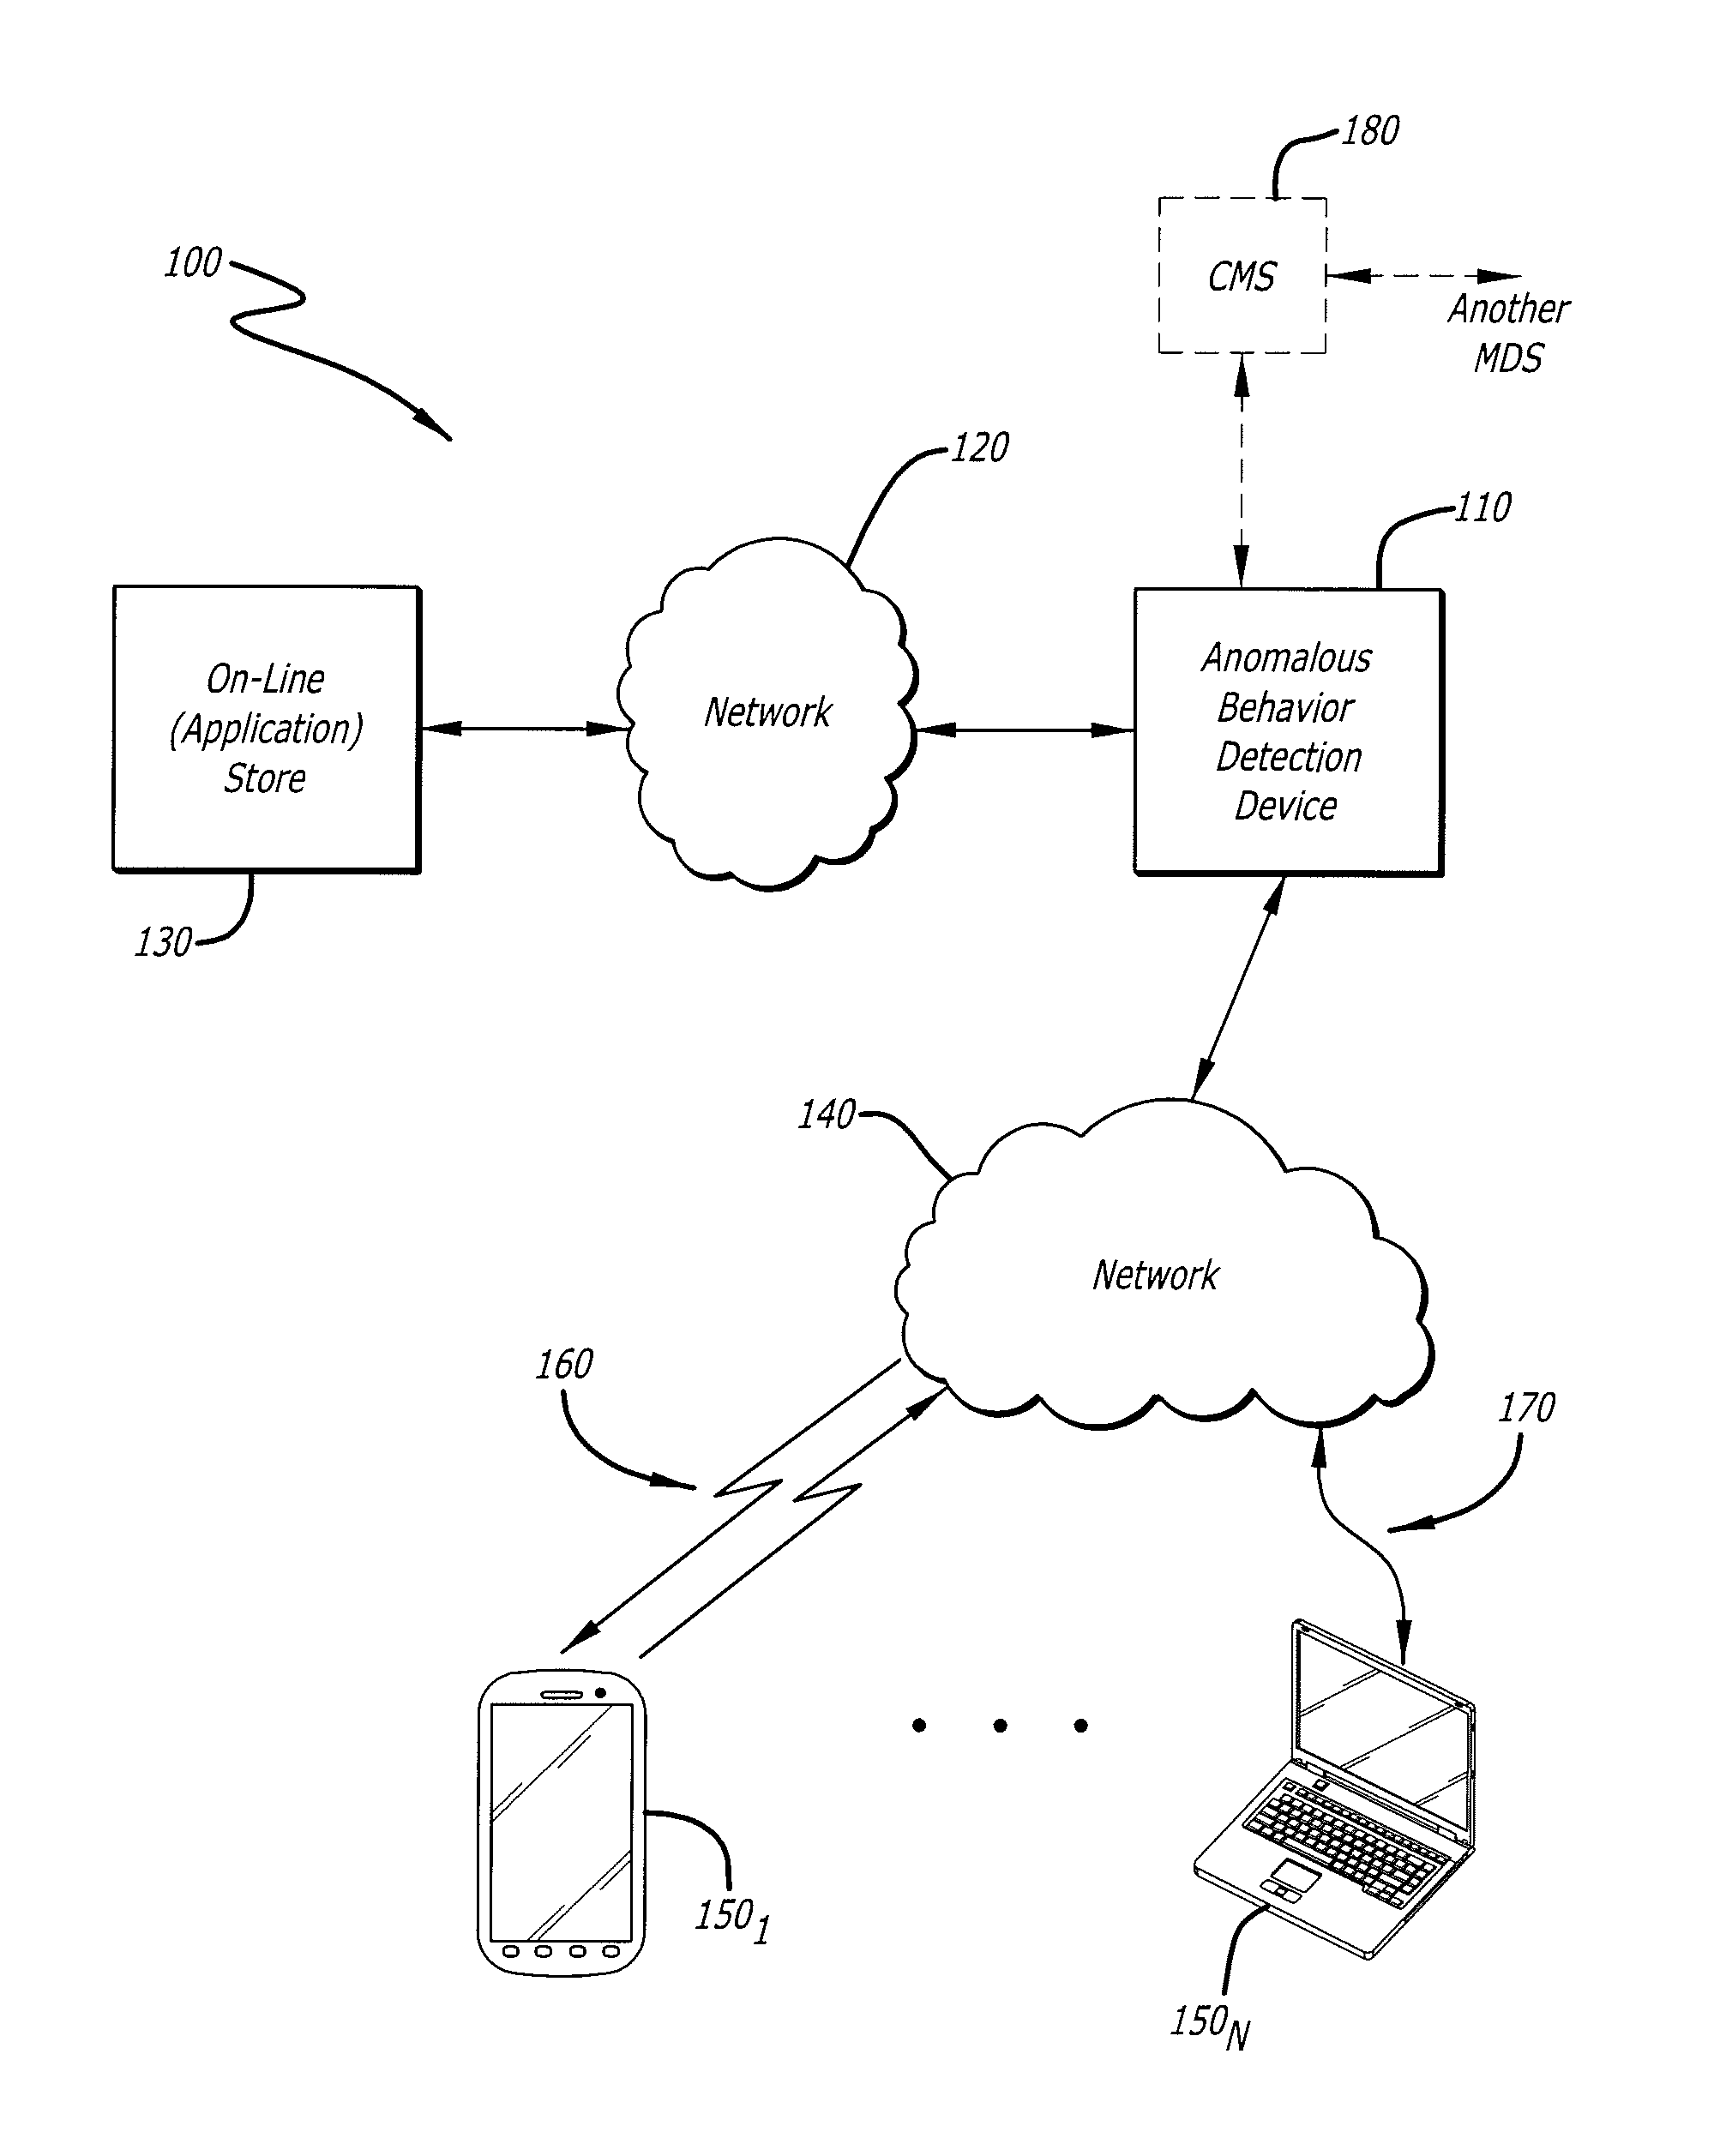 User interface with real-time visual playback along with synchronous textual analysis log display and event/time index for anomalous behavior detection in applications